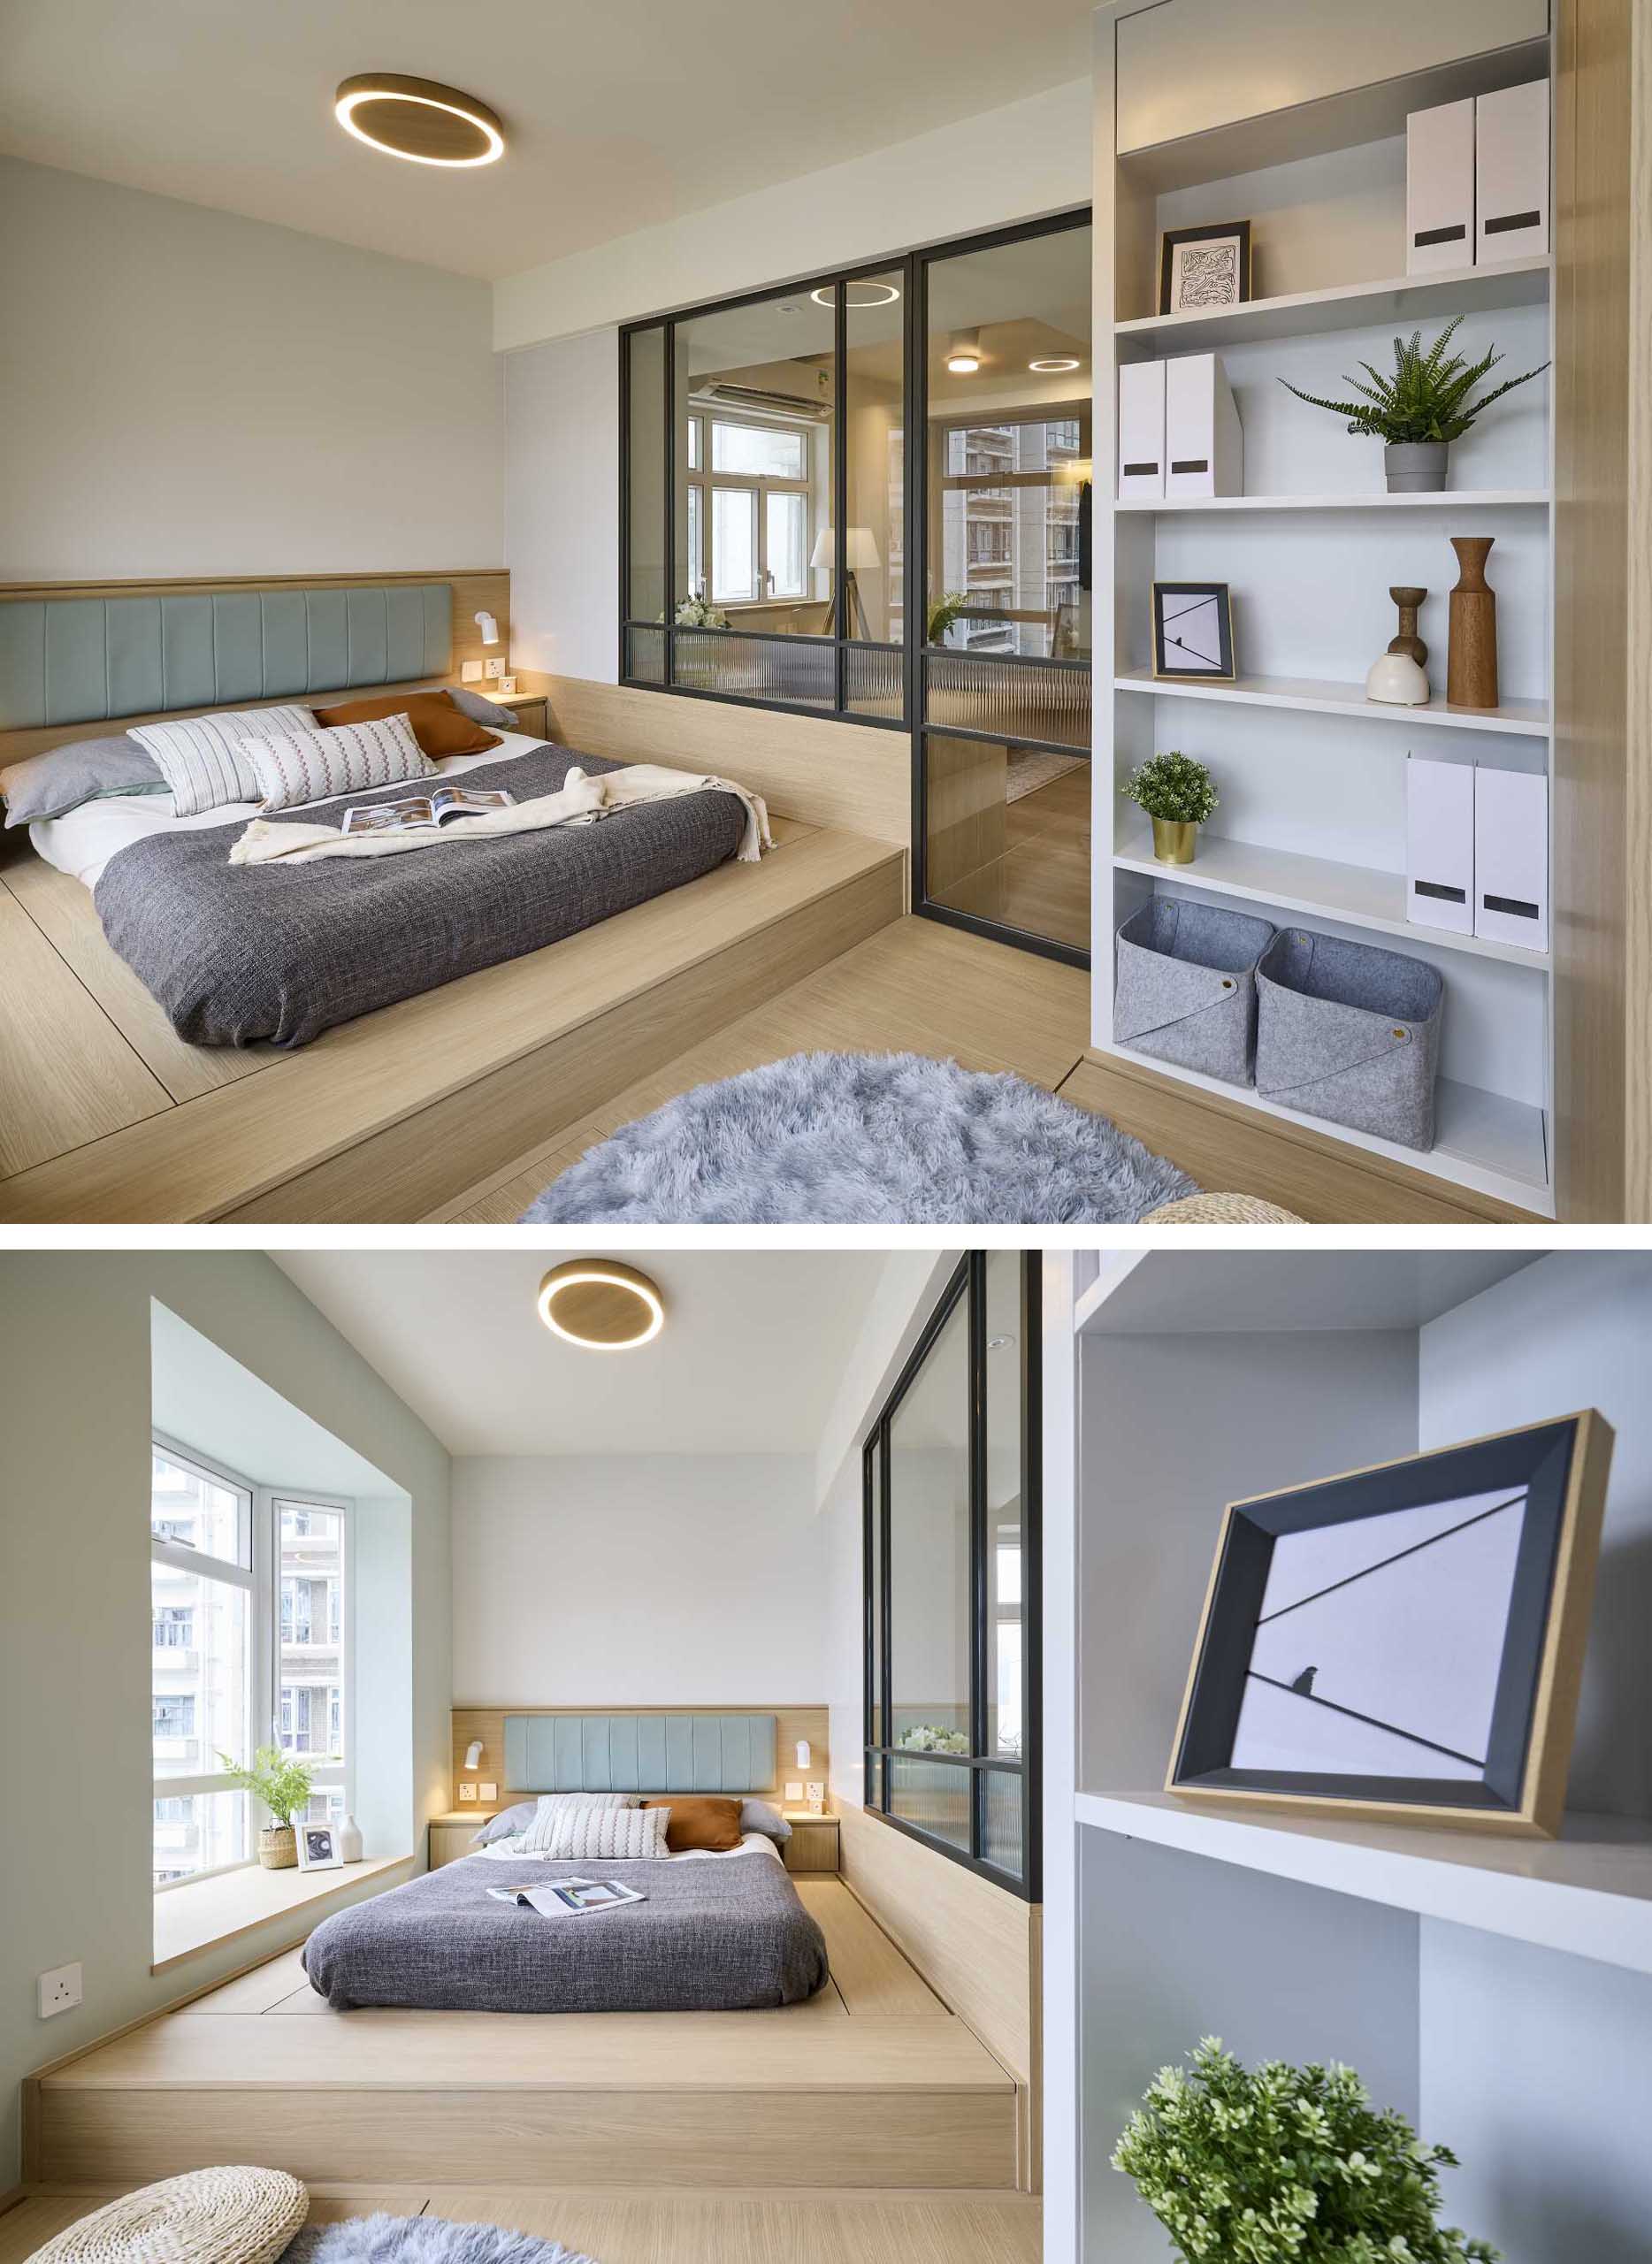 In the bedroom, the bed is raised up on a wood platform, that also includes bedside tables. By the windows there's additional wood platforms that allows for extra seating and places to display plants.